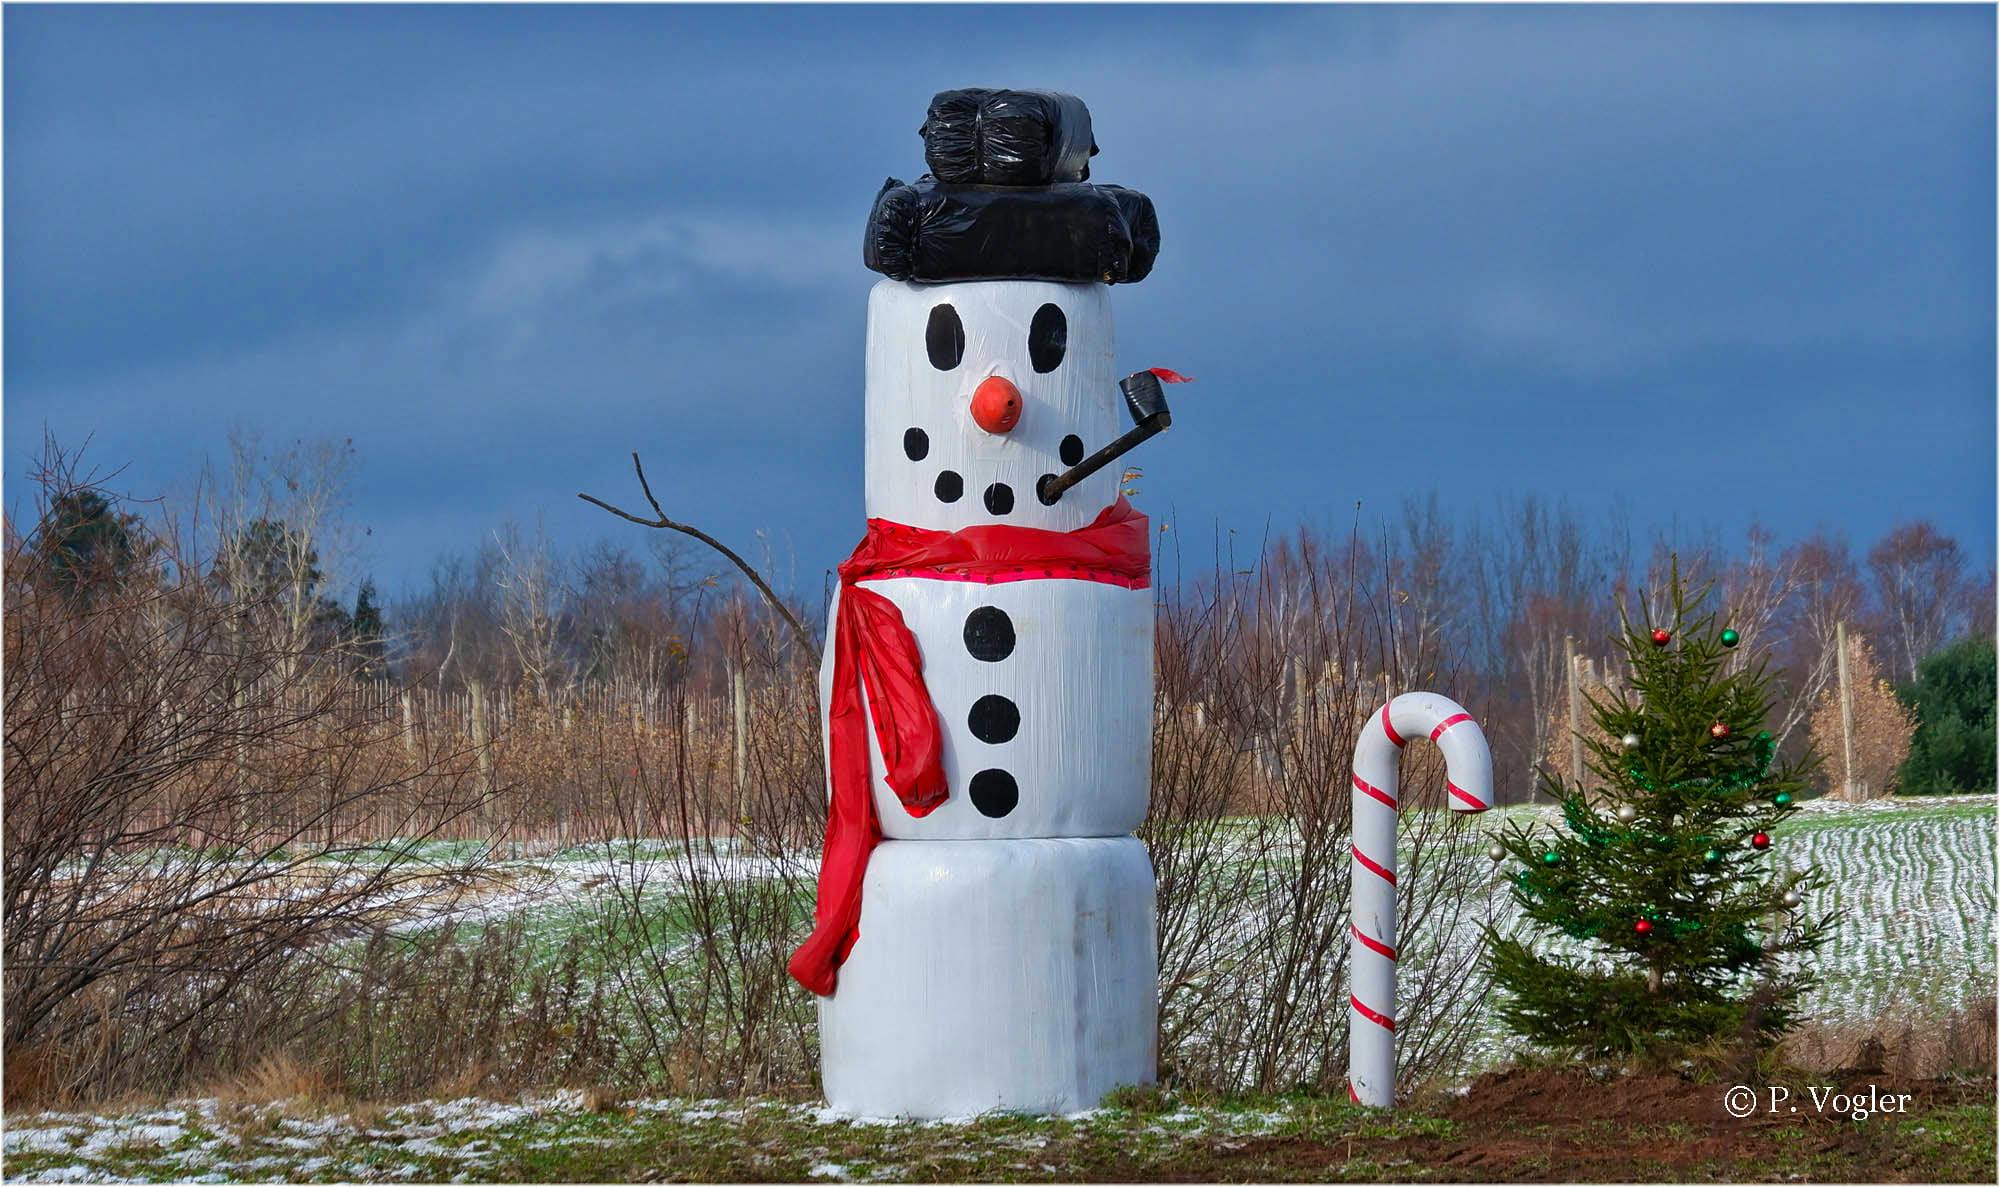 Frosty is back in town and is catching the eyes of many on Highway 101 between Coldbrook and Berwick, N.S., including Phil Volger. Phil said Frosty is a creation of the Best Family Farm and has been around for a few years. A unique way to spread some cheer this holiday season. I’m sure Frosty will enjoy the cooler temperatures this weekend too. Thank you for sharing, Phil.